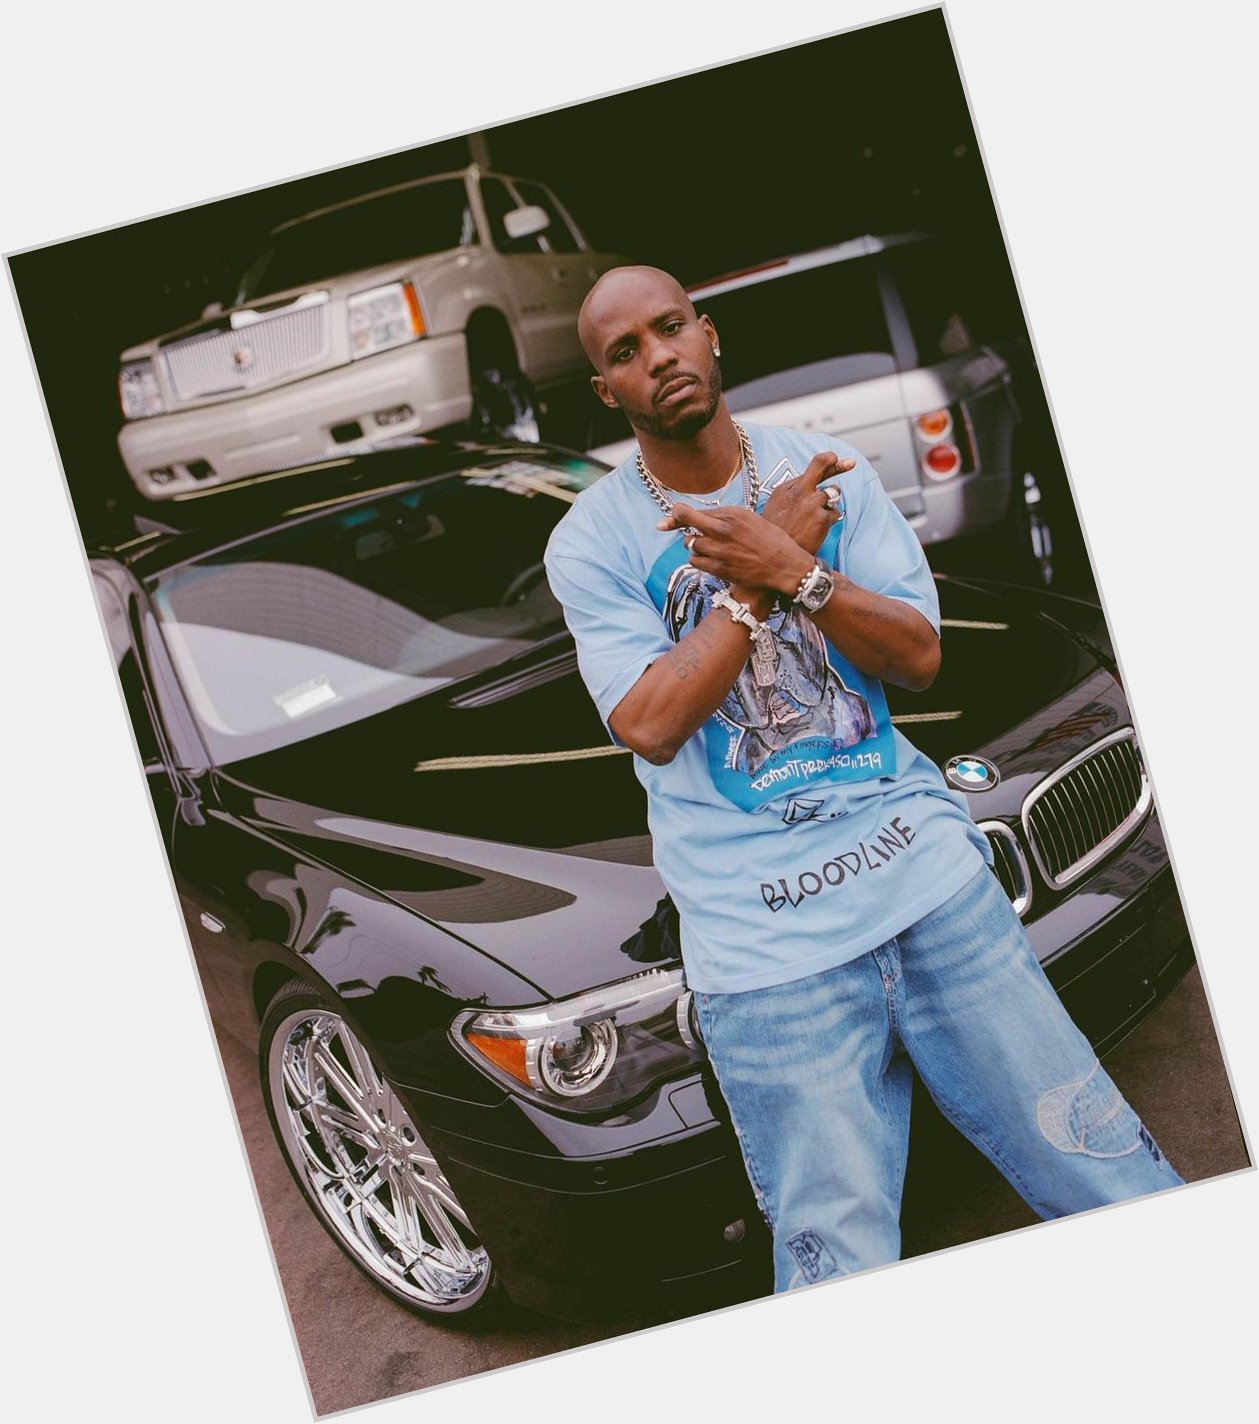 Happy Heavenly 51st Birthday to one of the greatest to ever grab the mic, The Great DMX 